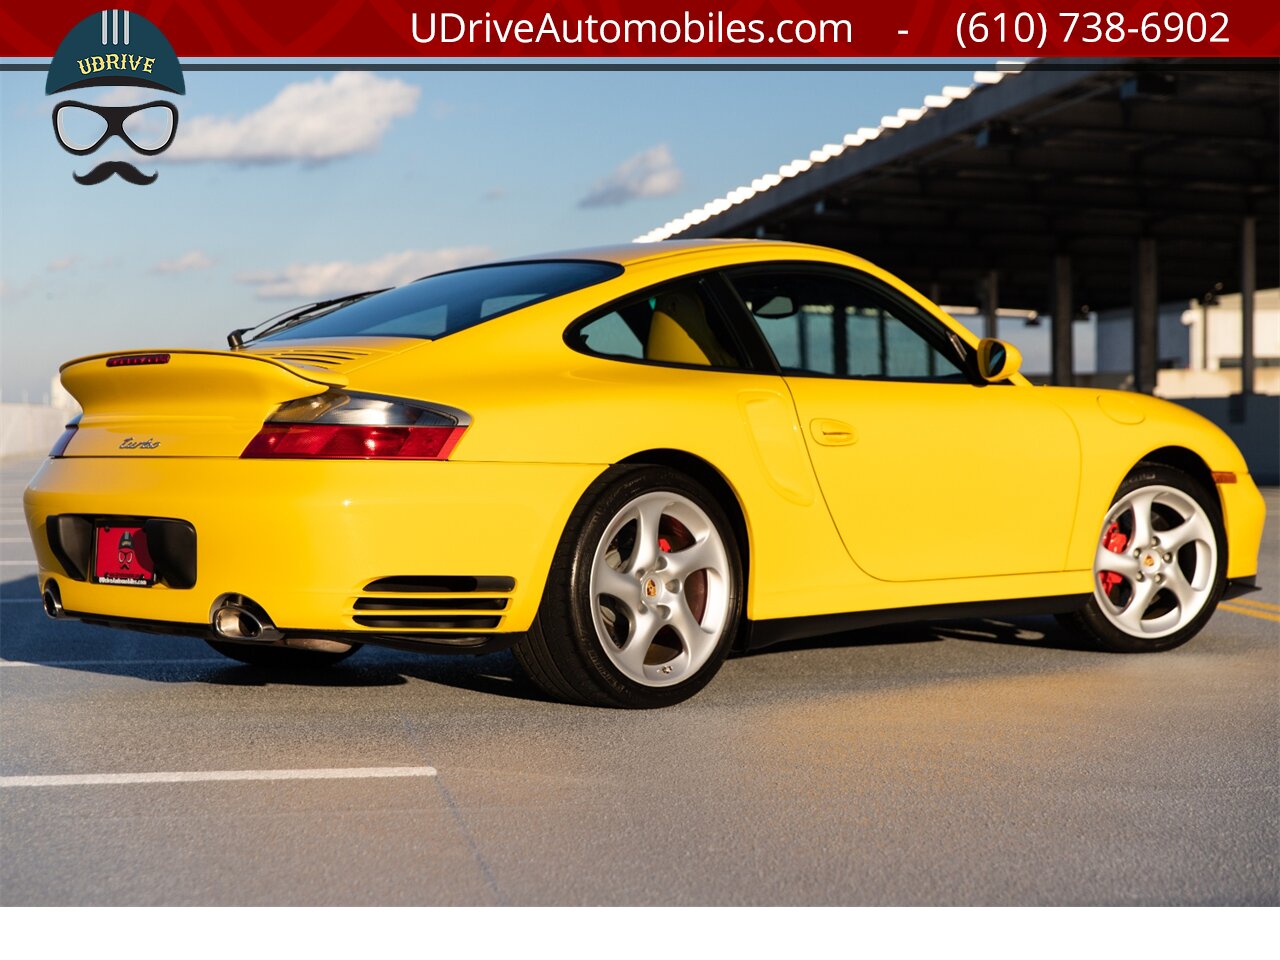 2001 Porsche 911 Turbo 996 6 Sp PTS Ferrari Giallo Modena  FULL Carbon Pkg 1 of a Kind Paint to Sample - Photo 3 - West Chester, PA 19382